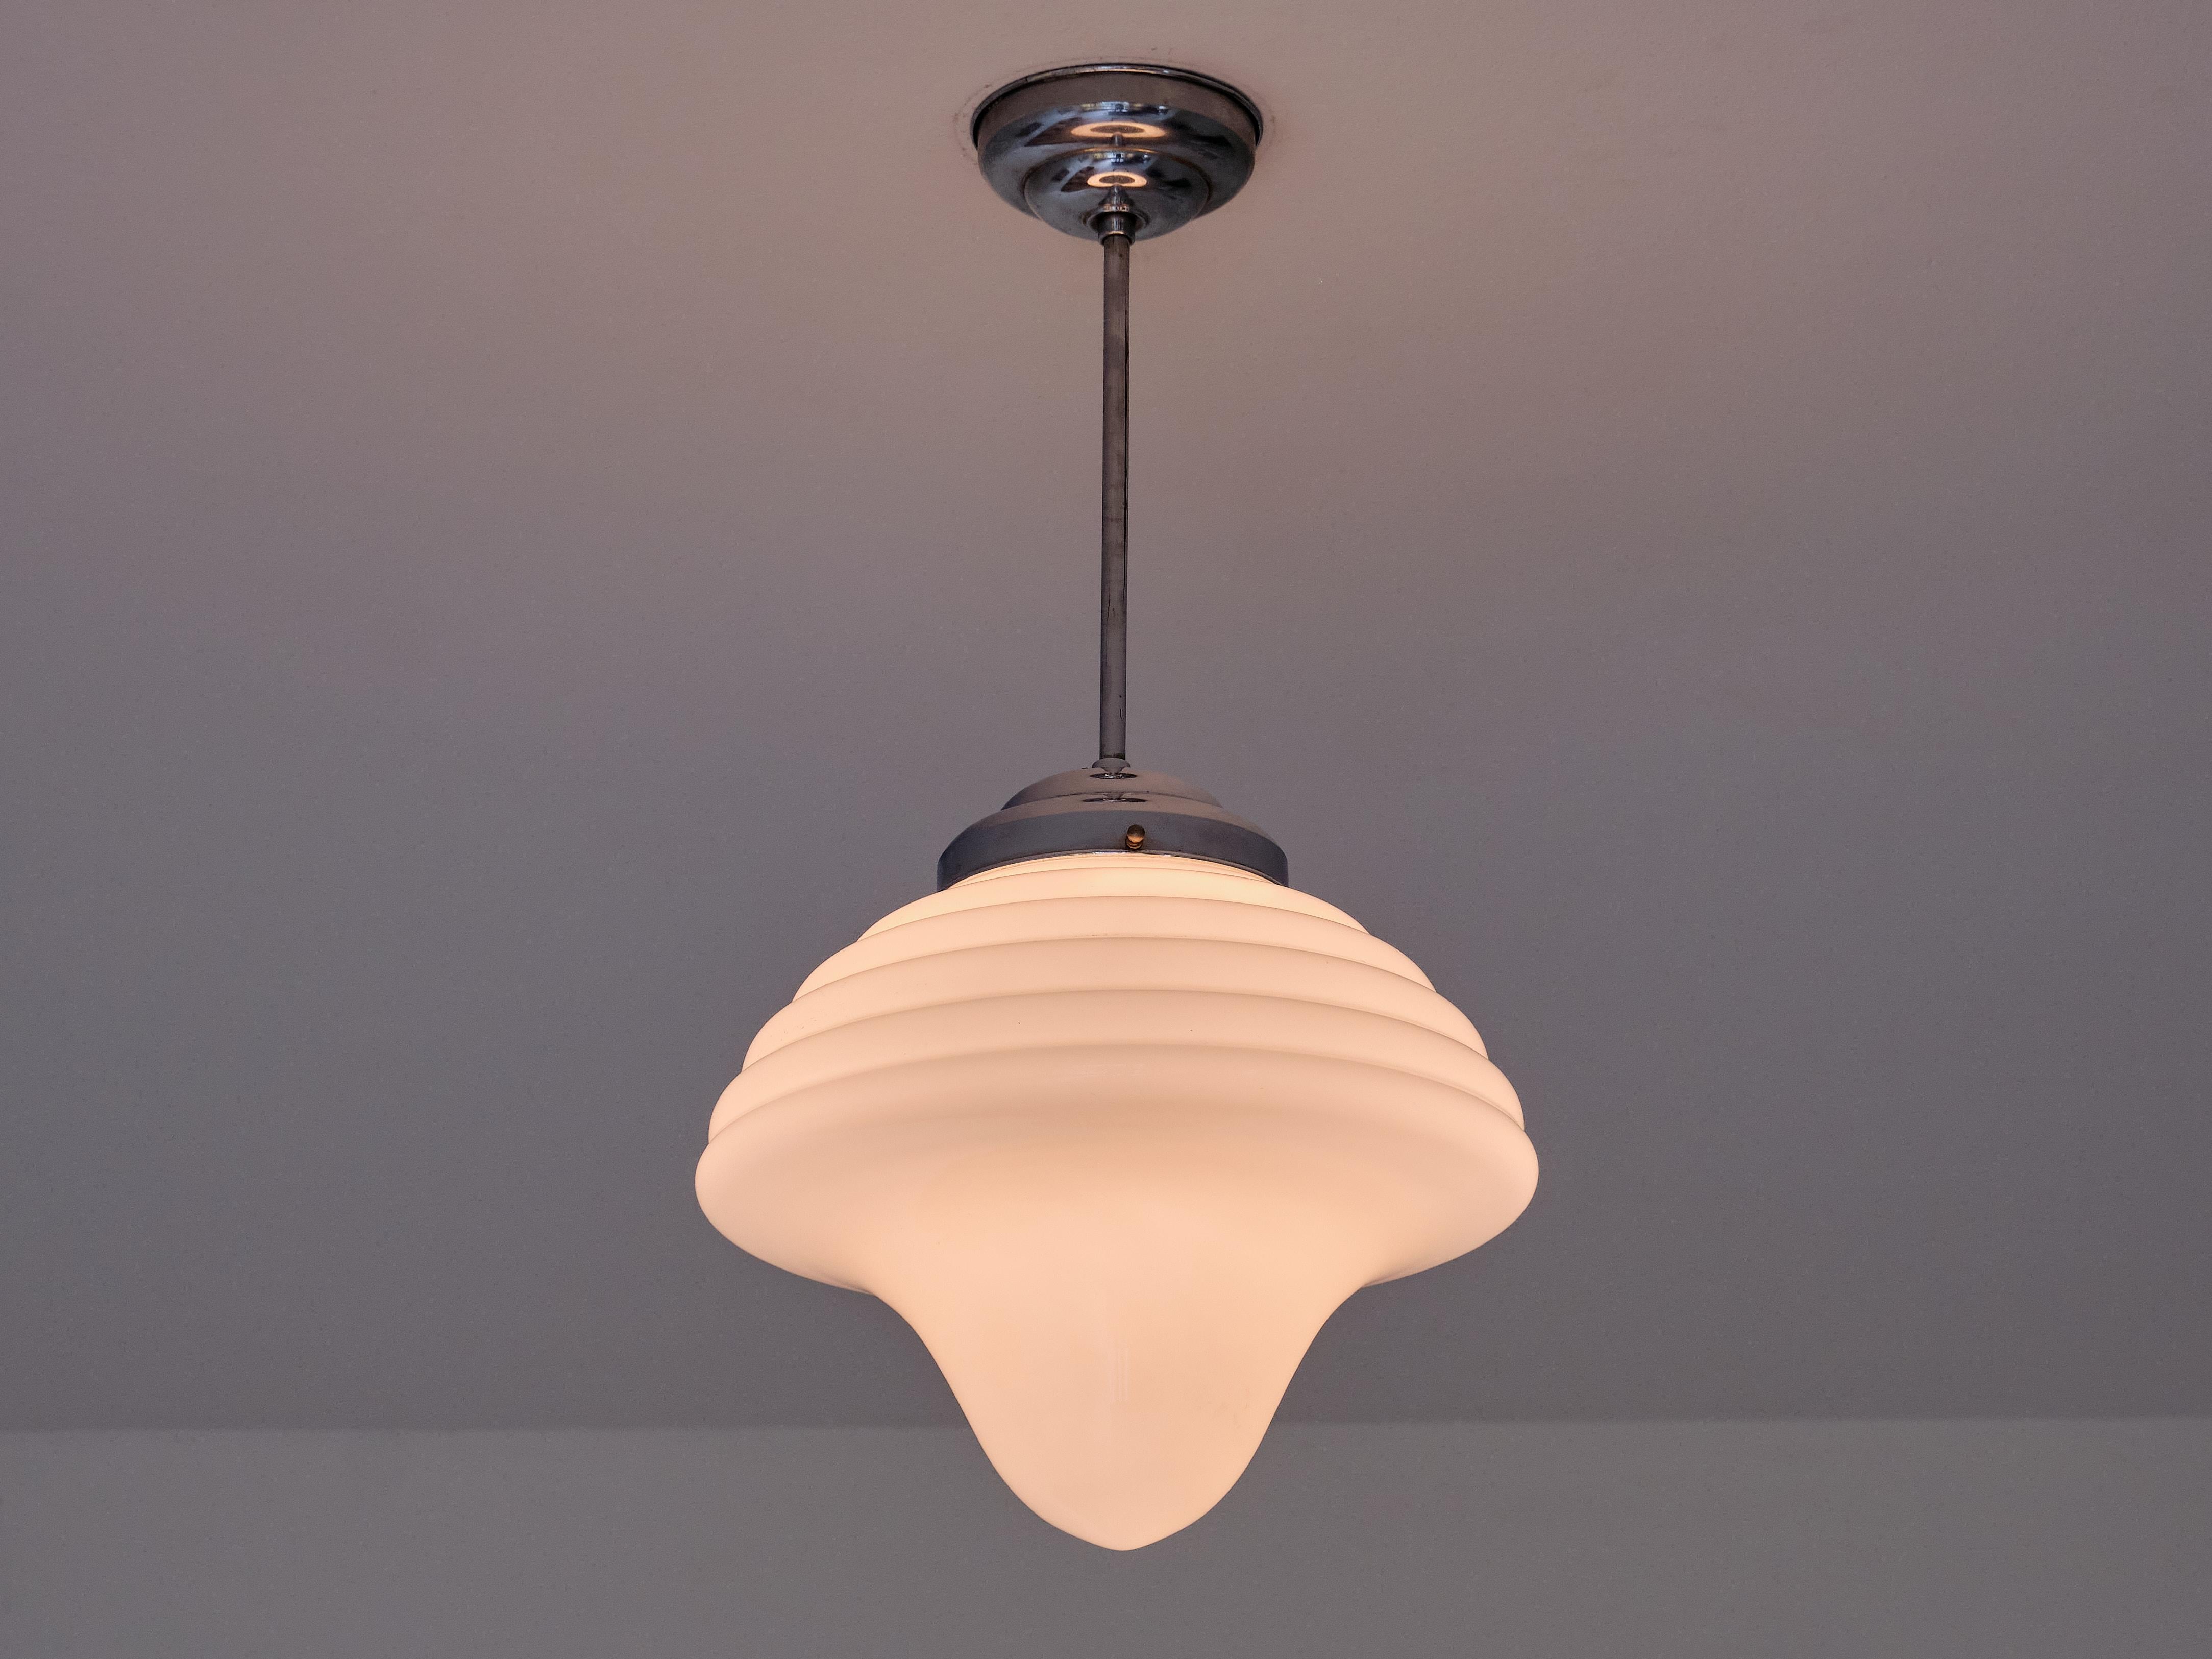 Art Deco Drop Shaped Pendant Light in Opal Glass and Nickel, Netherlands, 1930s For Sale 1